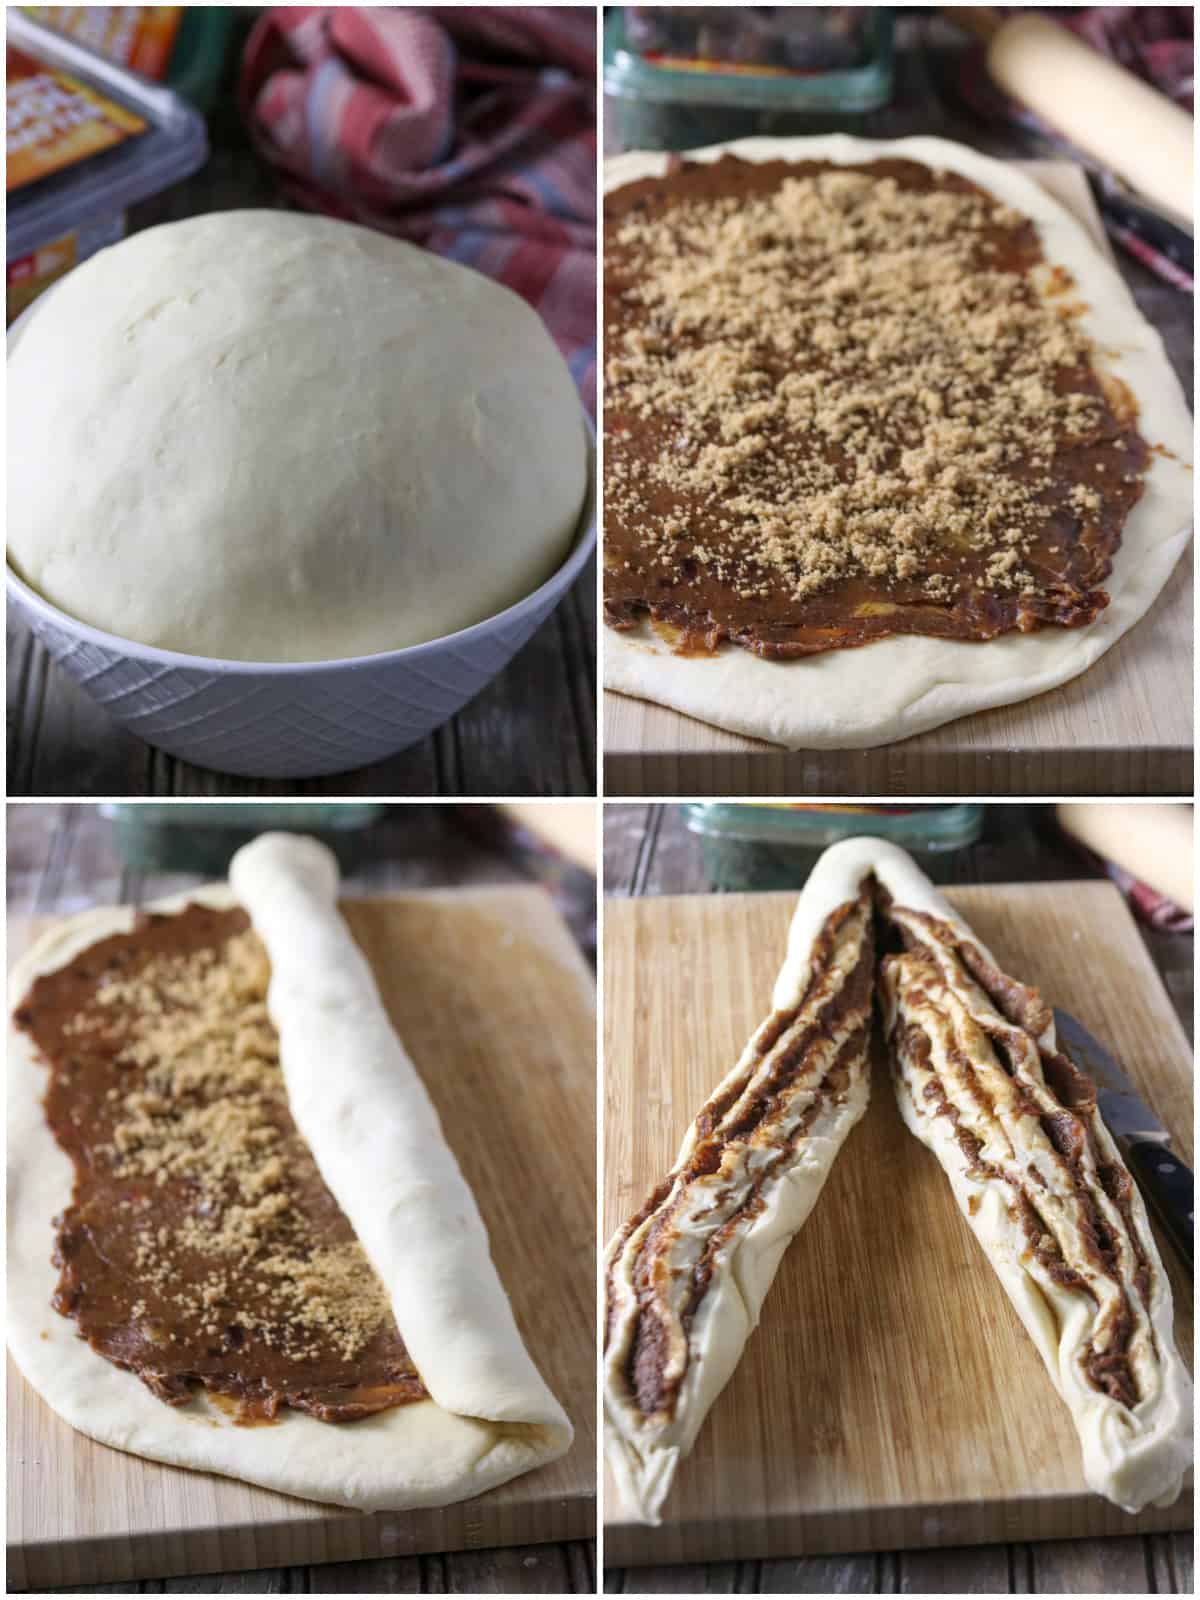 The process of filling the cinnamon loaf bread with medjool date paste.